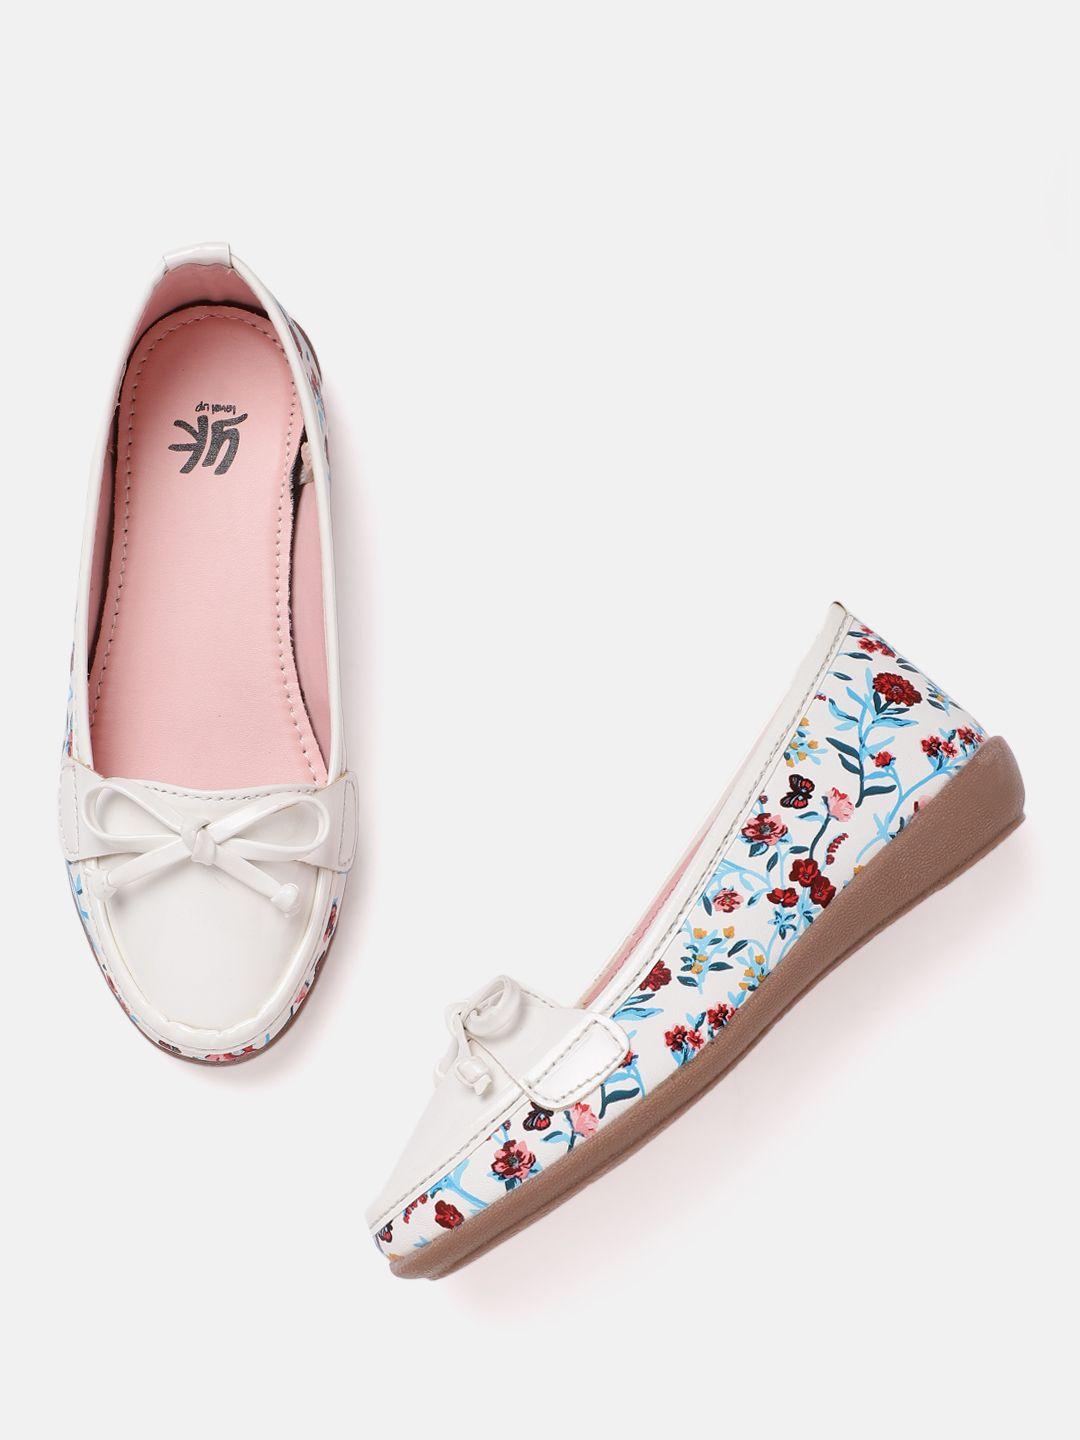 yk girls white & blue floral print ballerinas with bow detail